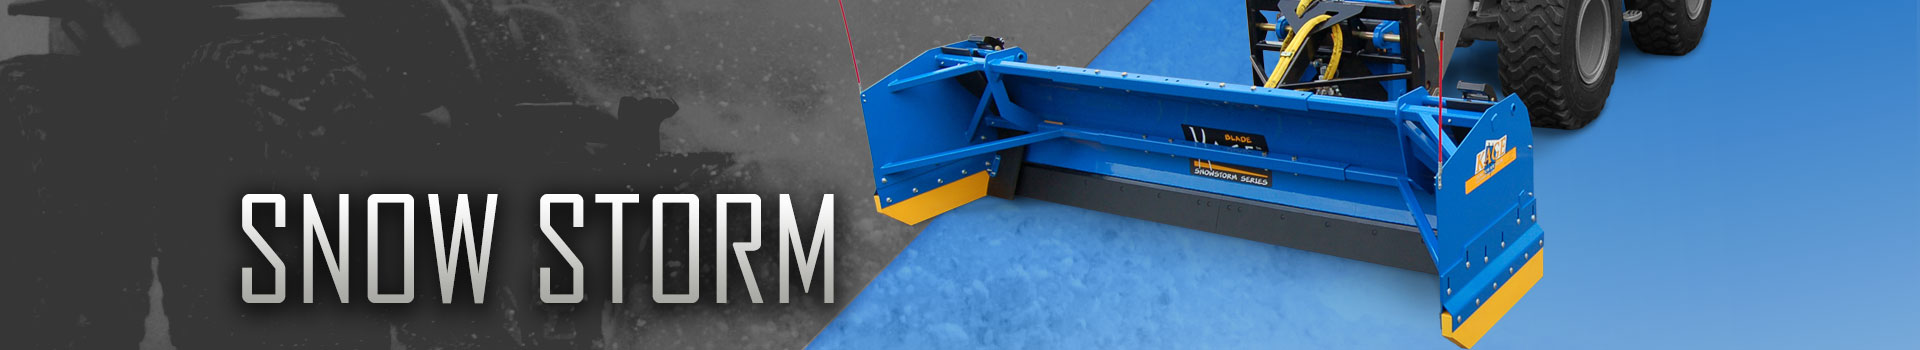 SnowStorm Plow System